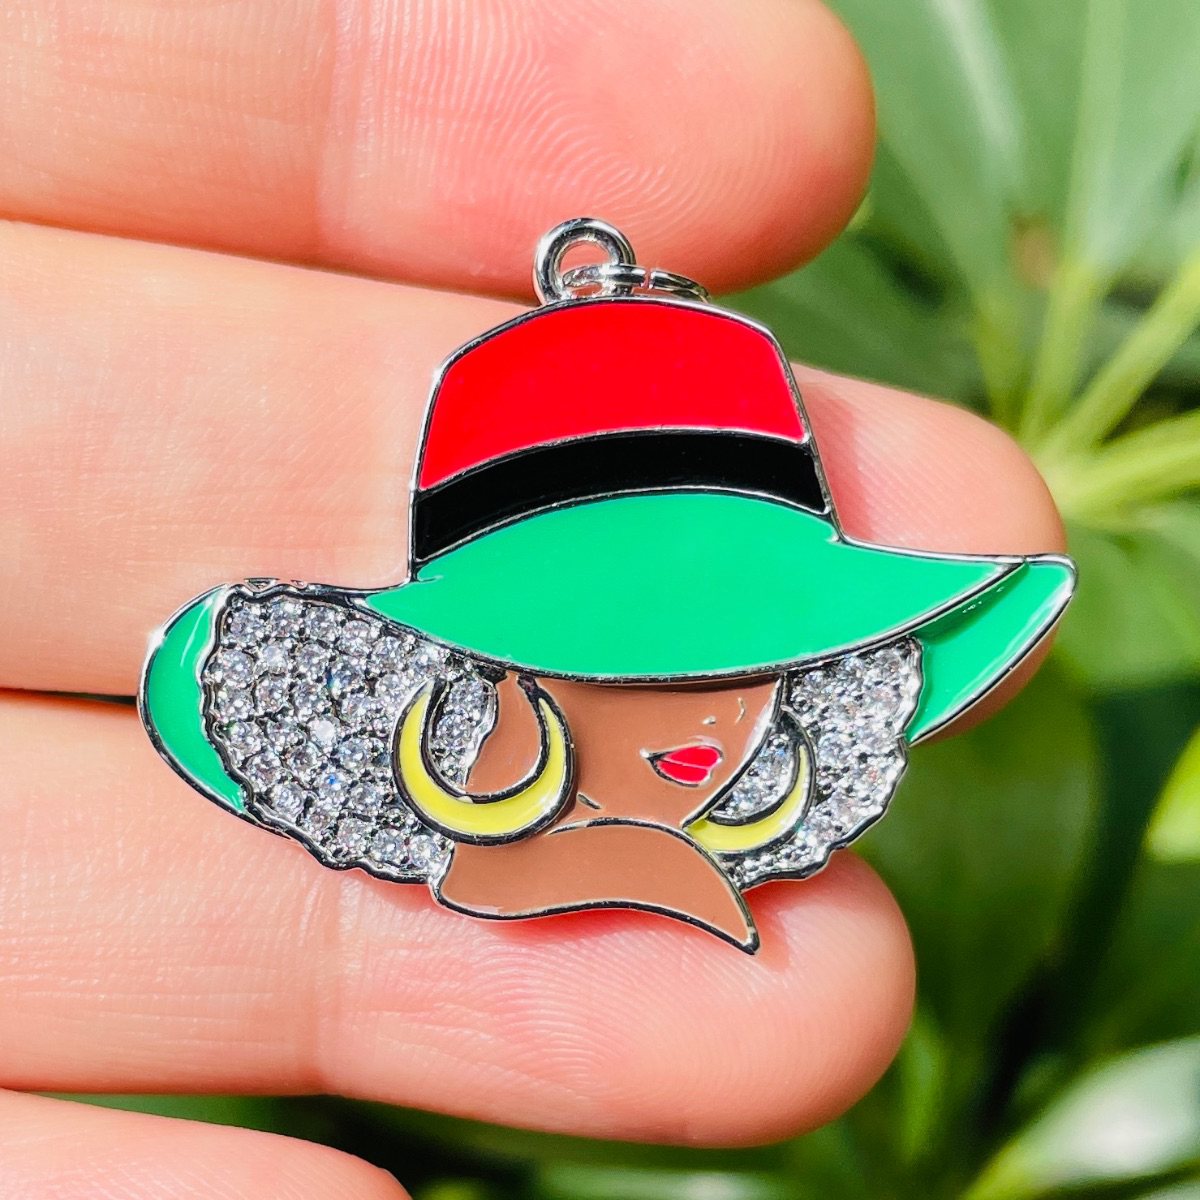 10pcs/lot CZ Paved Red Black Green Hat Afro Black Girl Charms for Juneteenth Awareness Silver CZ Paved Charms Afro Girl/Queen Charms Juneteenth & Black History Month Awareness New Charms Arrivals Charms Beads Beyond